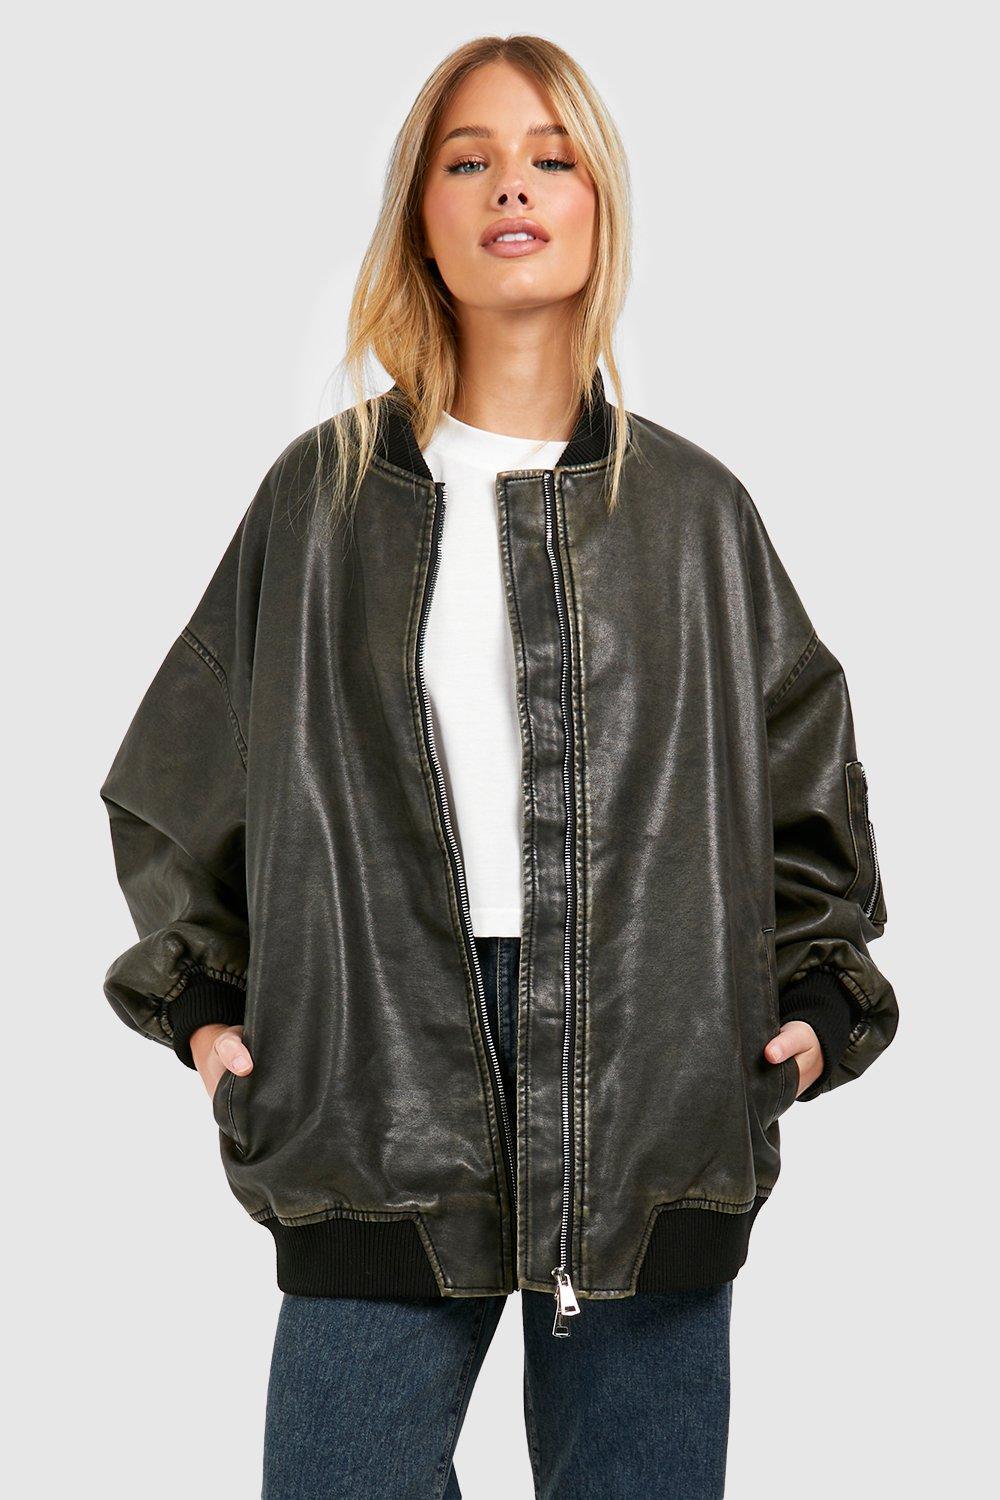 Boohoo Vintage Look Oversized Faux Leather Bomber Jacket in Grey | Lyst UK